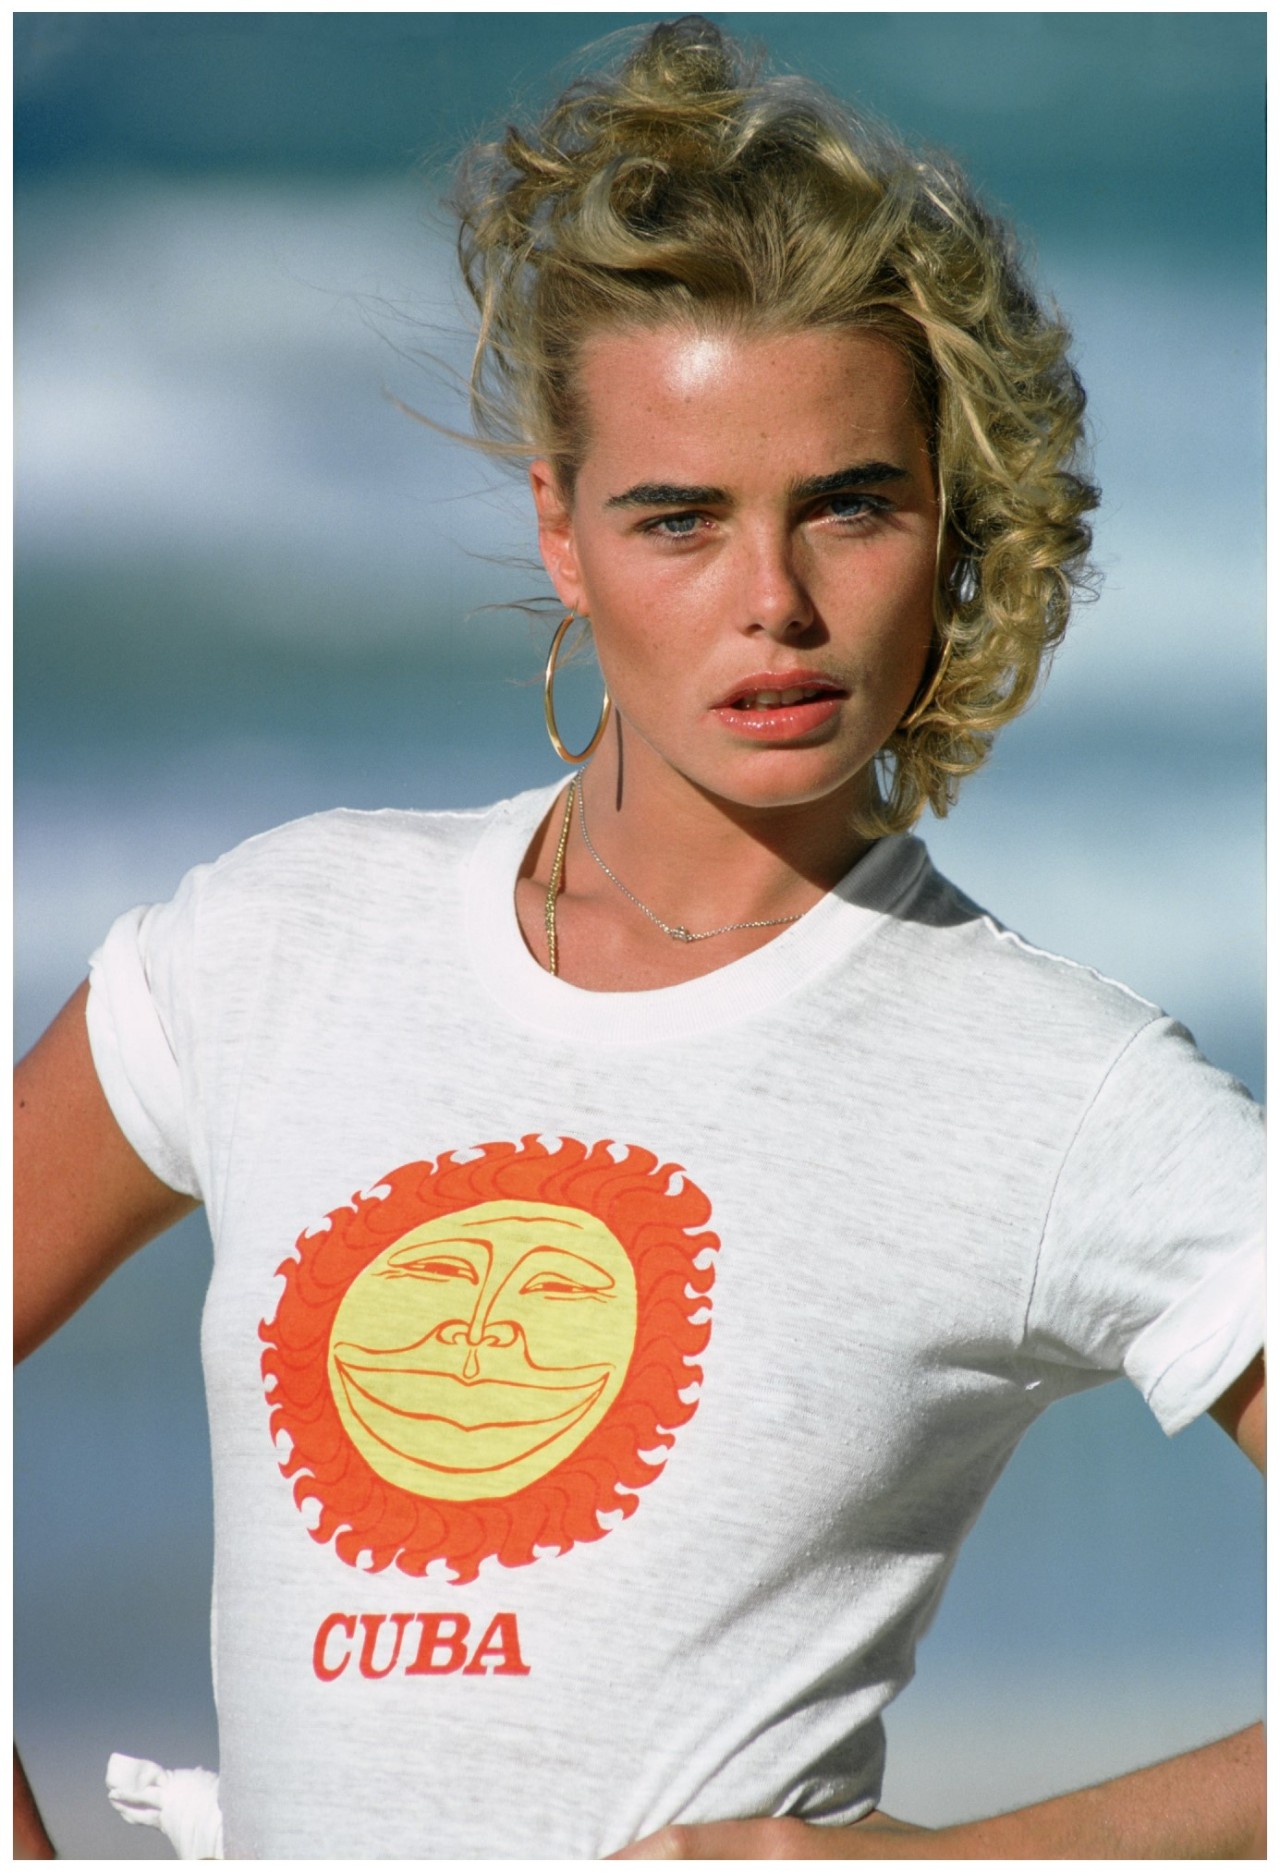 Margaux Hemingway by David Hume Kennerly 1978 #margaux hemingway #david hume kennerly